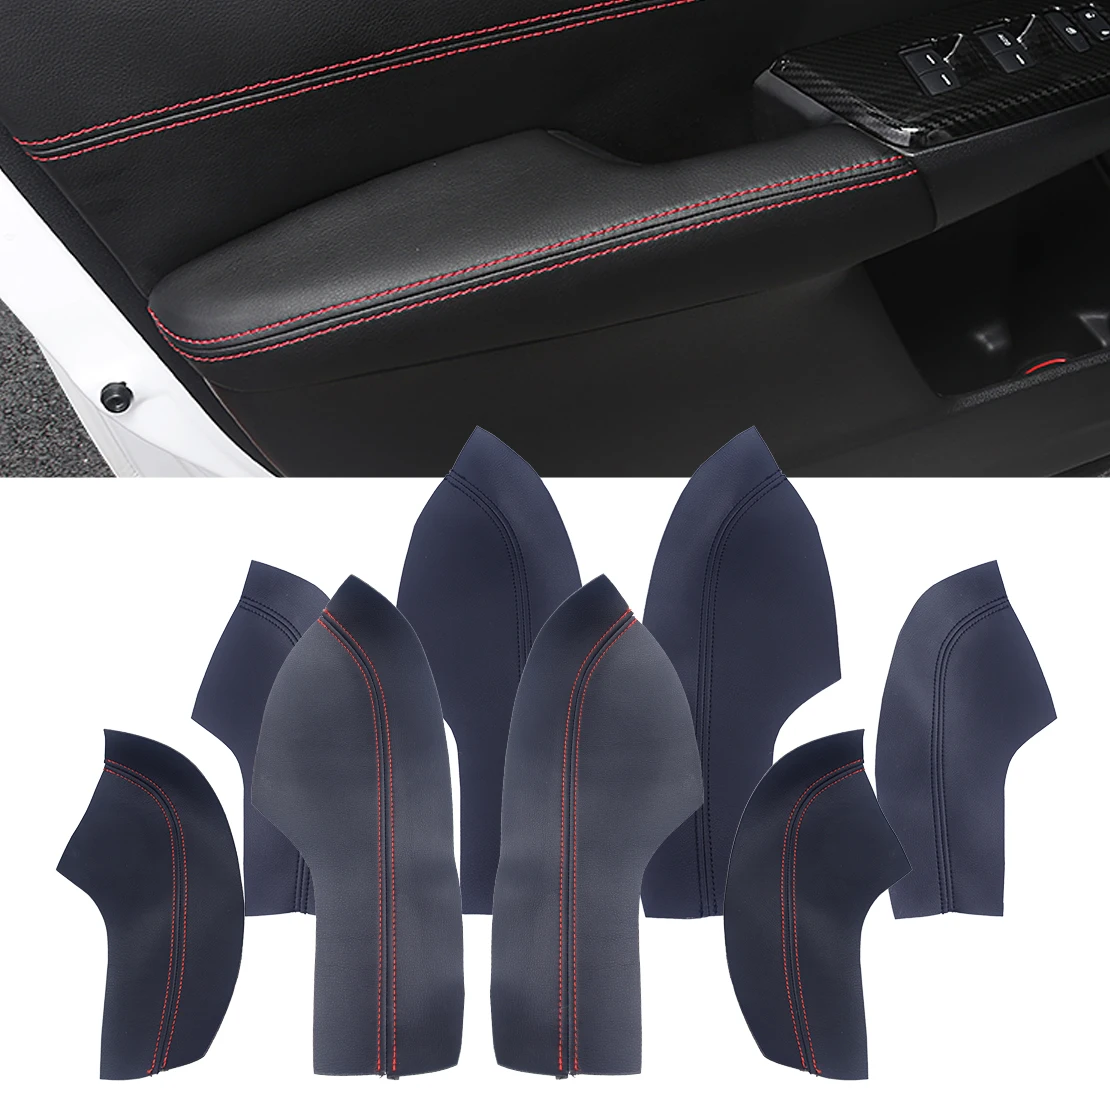 DWCX 4pcs Car Inner Door Panel Armrest Protective Sleeve Trim PU Leather Shell Cover Fit for Honda Civic 10th 2016 2017 2018